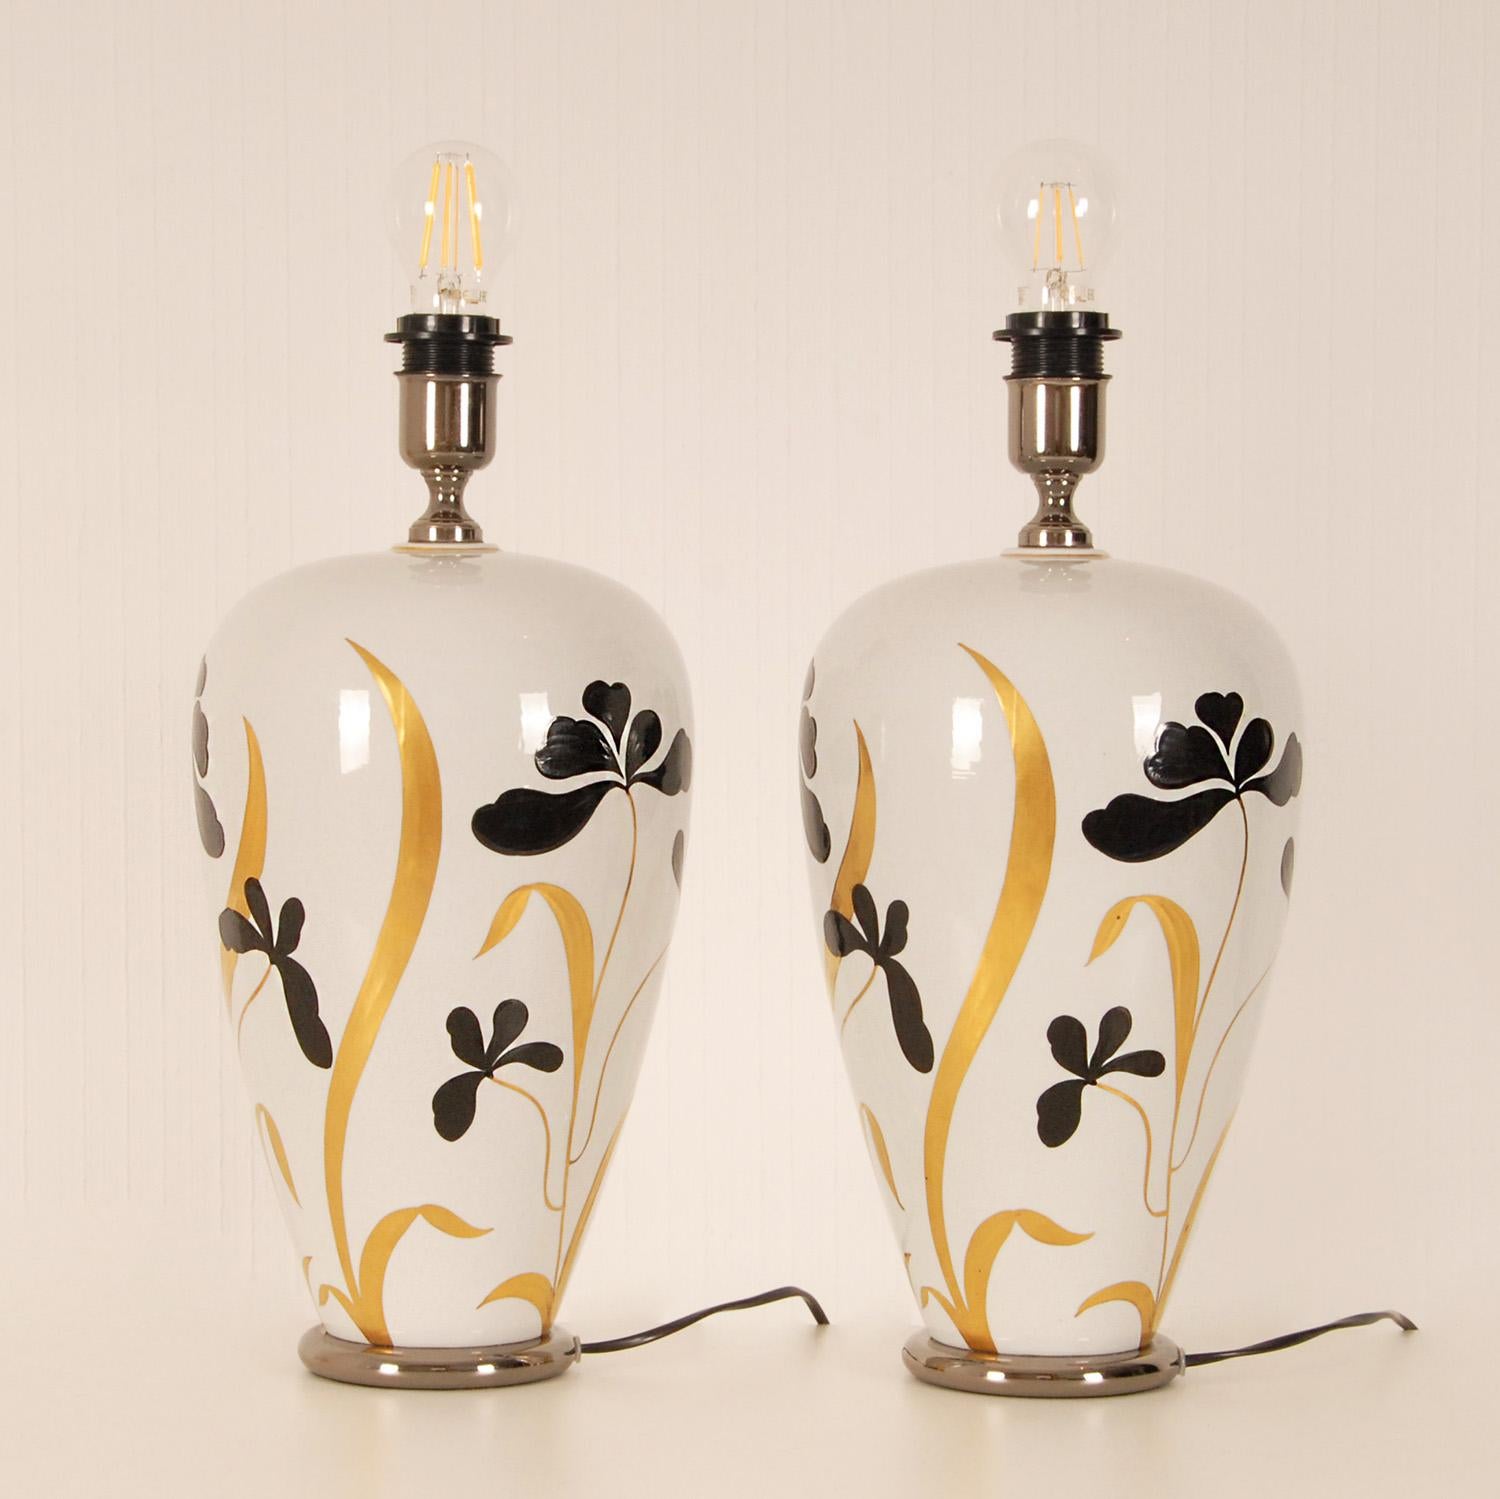 Hand-Crafted Vintage 1970s Italian Ceramic Vase Lamps Gold Black White Porcelain, a Pair For Sale